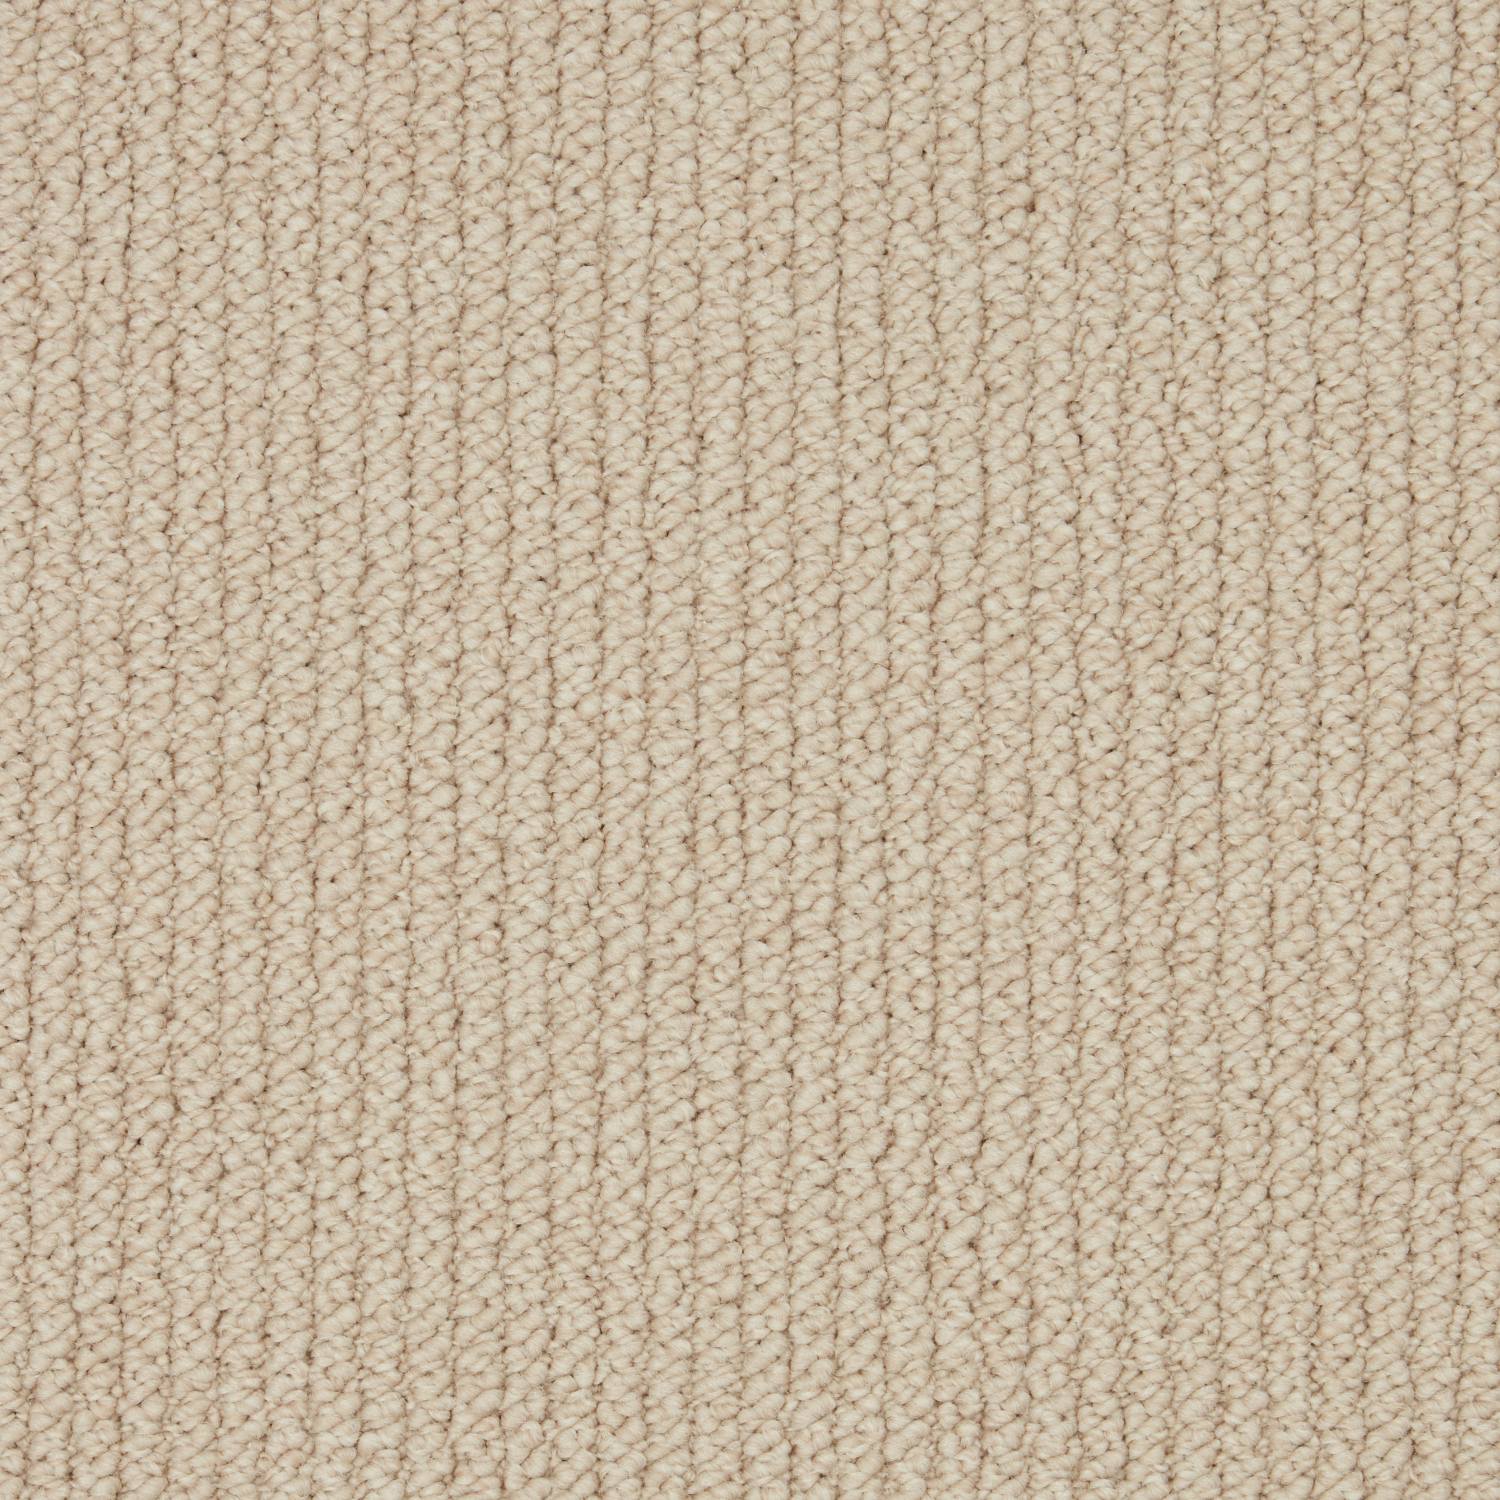 Rural Textures Loop Carpet - Soft Leather Ribbed